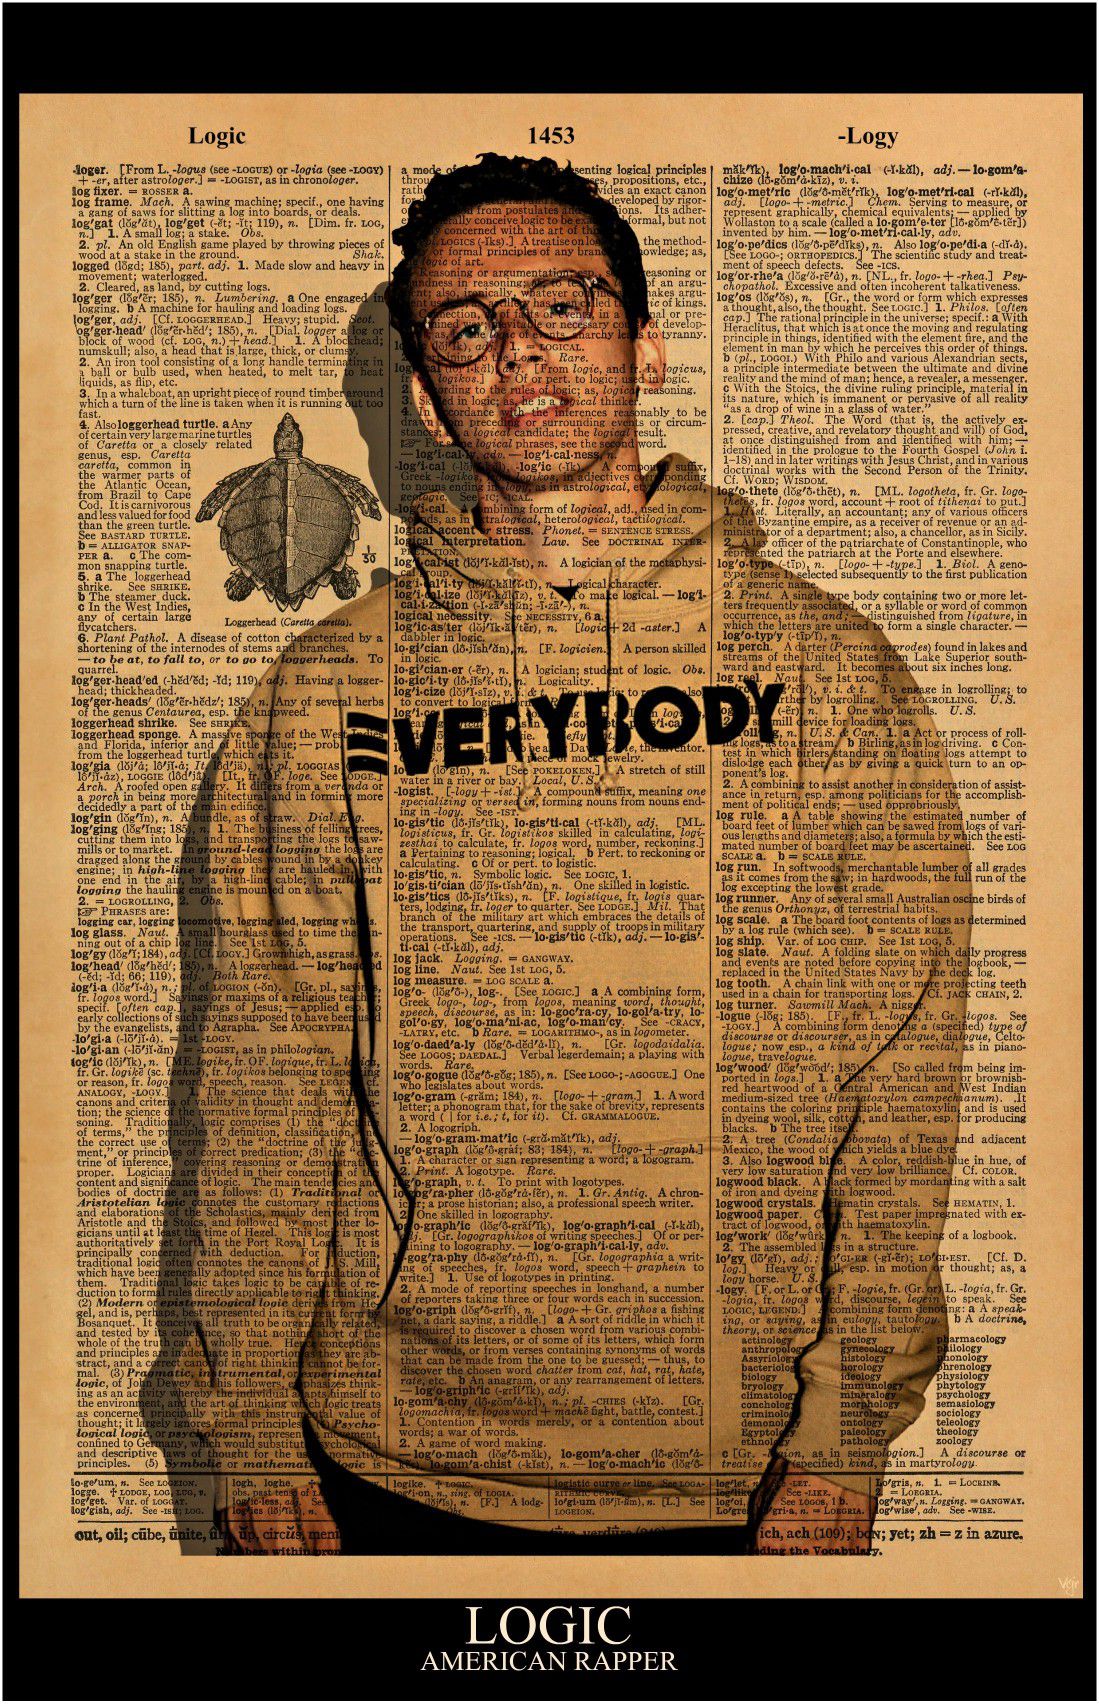 American Rapper LOGIC Print / Poster 11x17 Vintage Dictionary style on a page with the word LOGIC